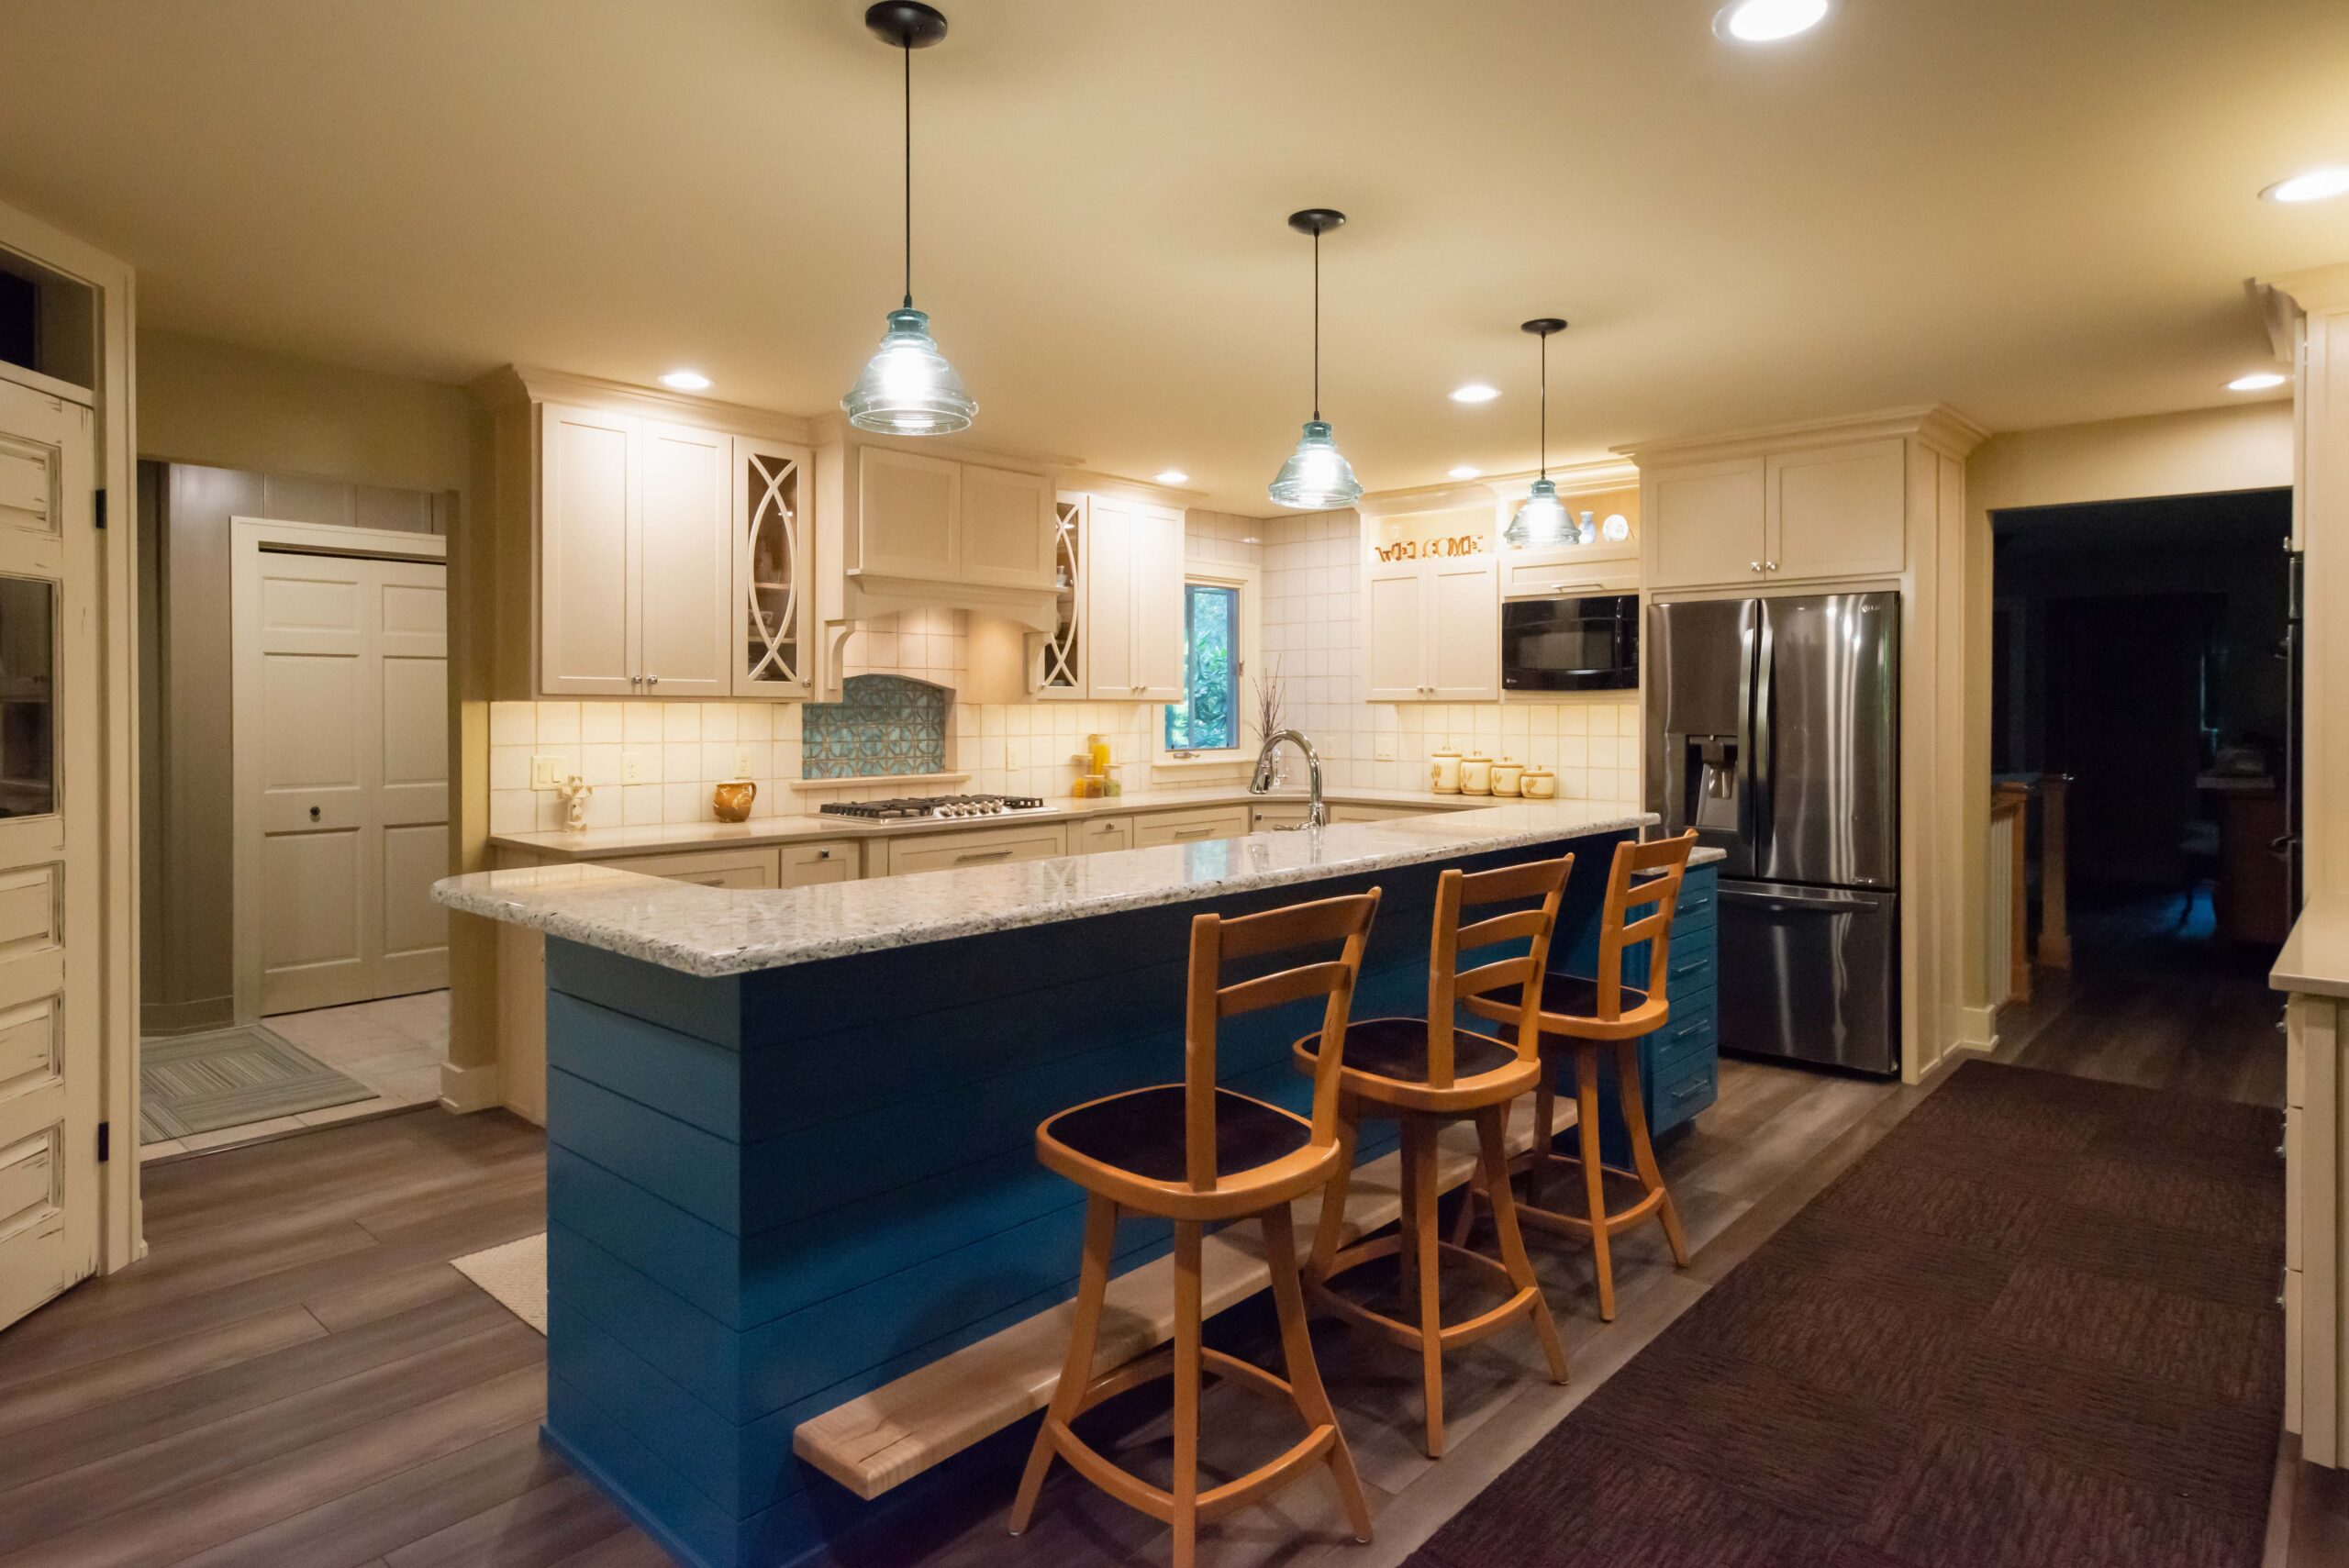 Kitchen with blue island bar and cabinetry